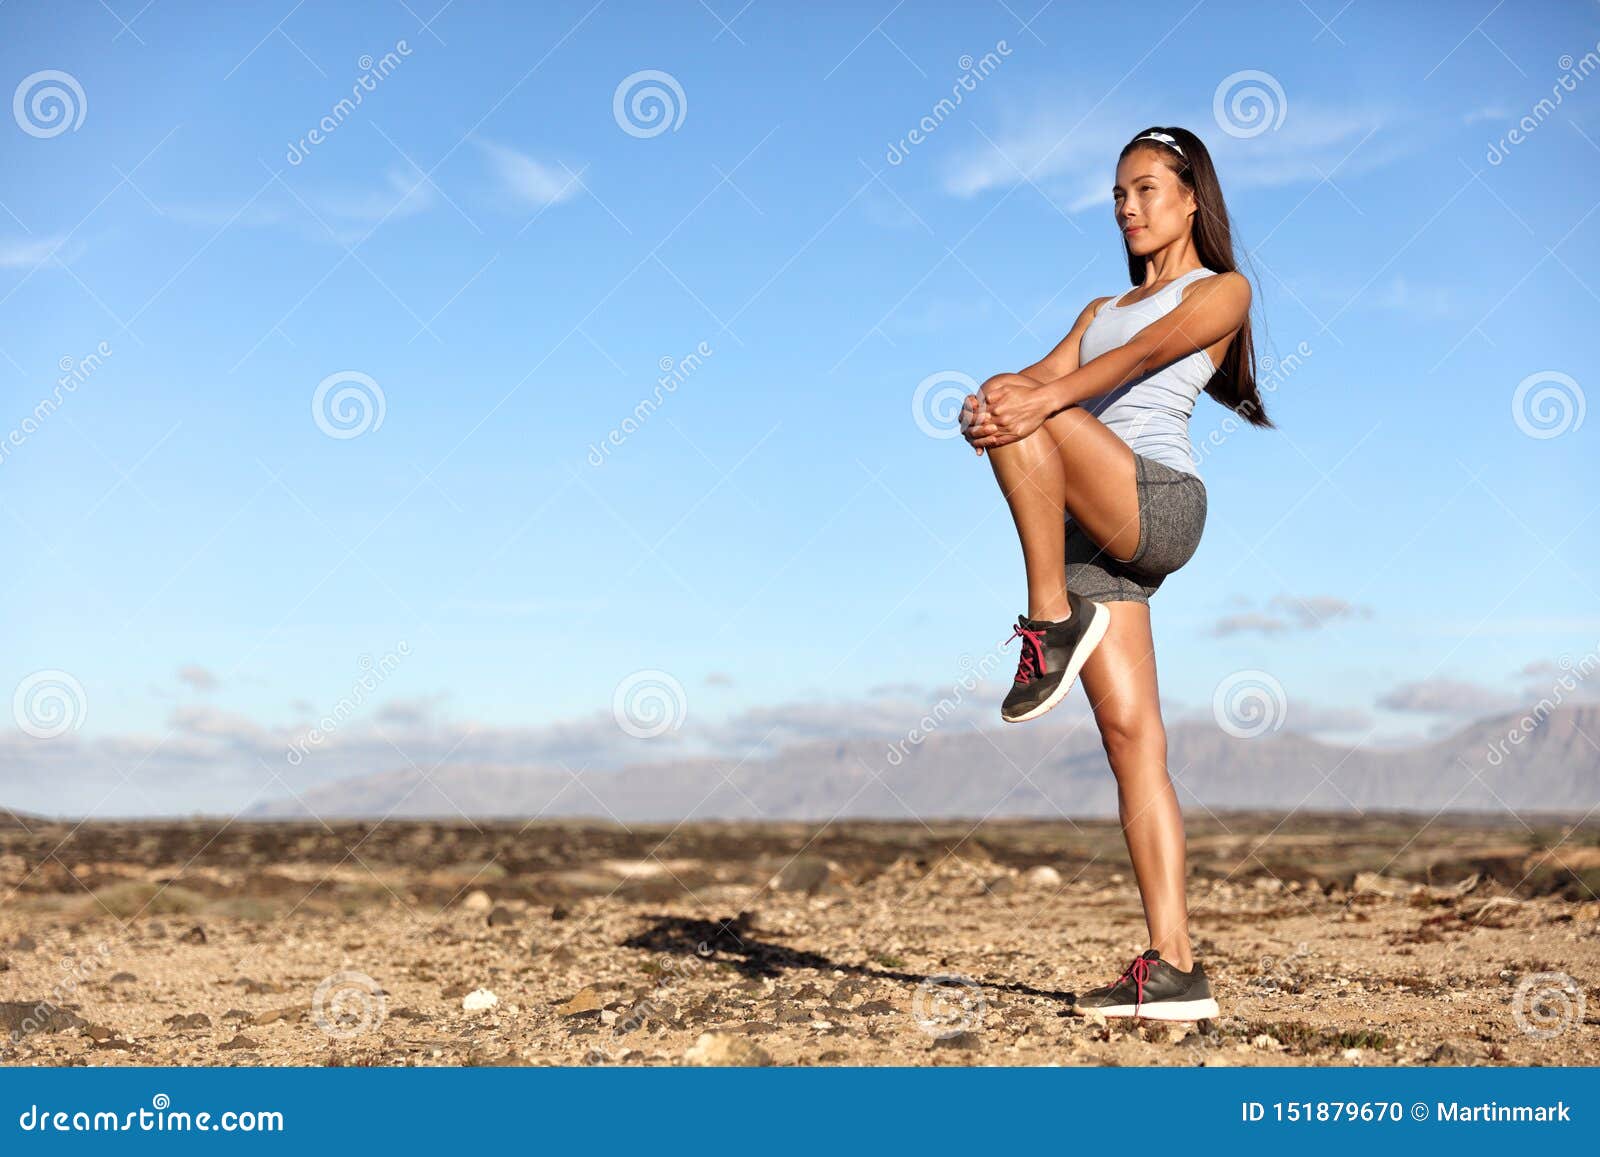 Standing Glutes Leg Stretch Fitness Woman Workout Stock Photo - Image of  fitness, person: 151879670